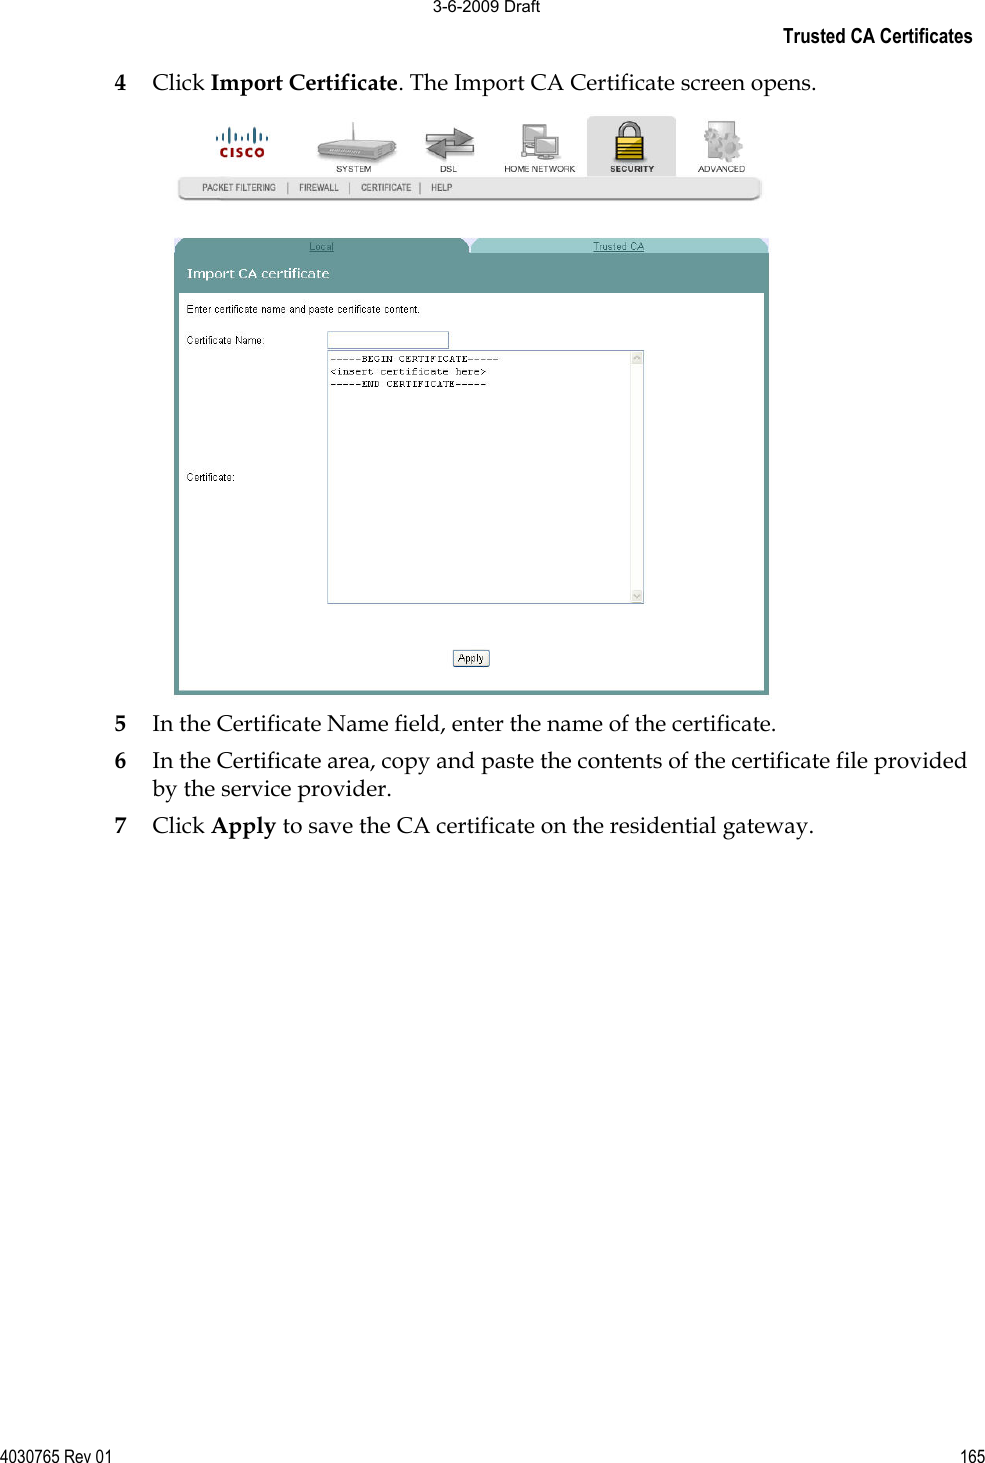 Trusted CA Certificates 4030765 Rev 01 1654Click Import Certificate. The Import CA Certificate screen opens. 5In the Certificate Name field, enter the name of the certificate. 6In the Certificate area, copy and paste the contents of the certificate file provided by the service provider. 7Click Apply to save the CA certificate on the residential gateway. 3-6-2009 Draft